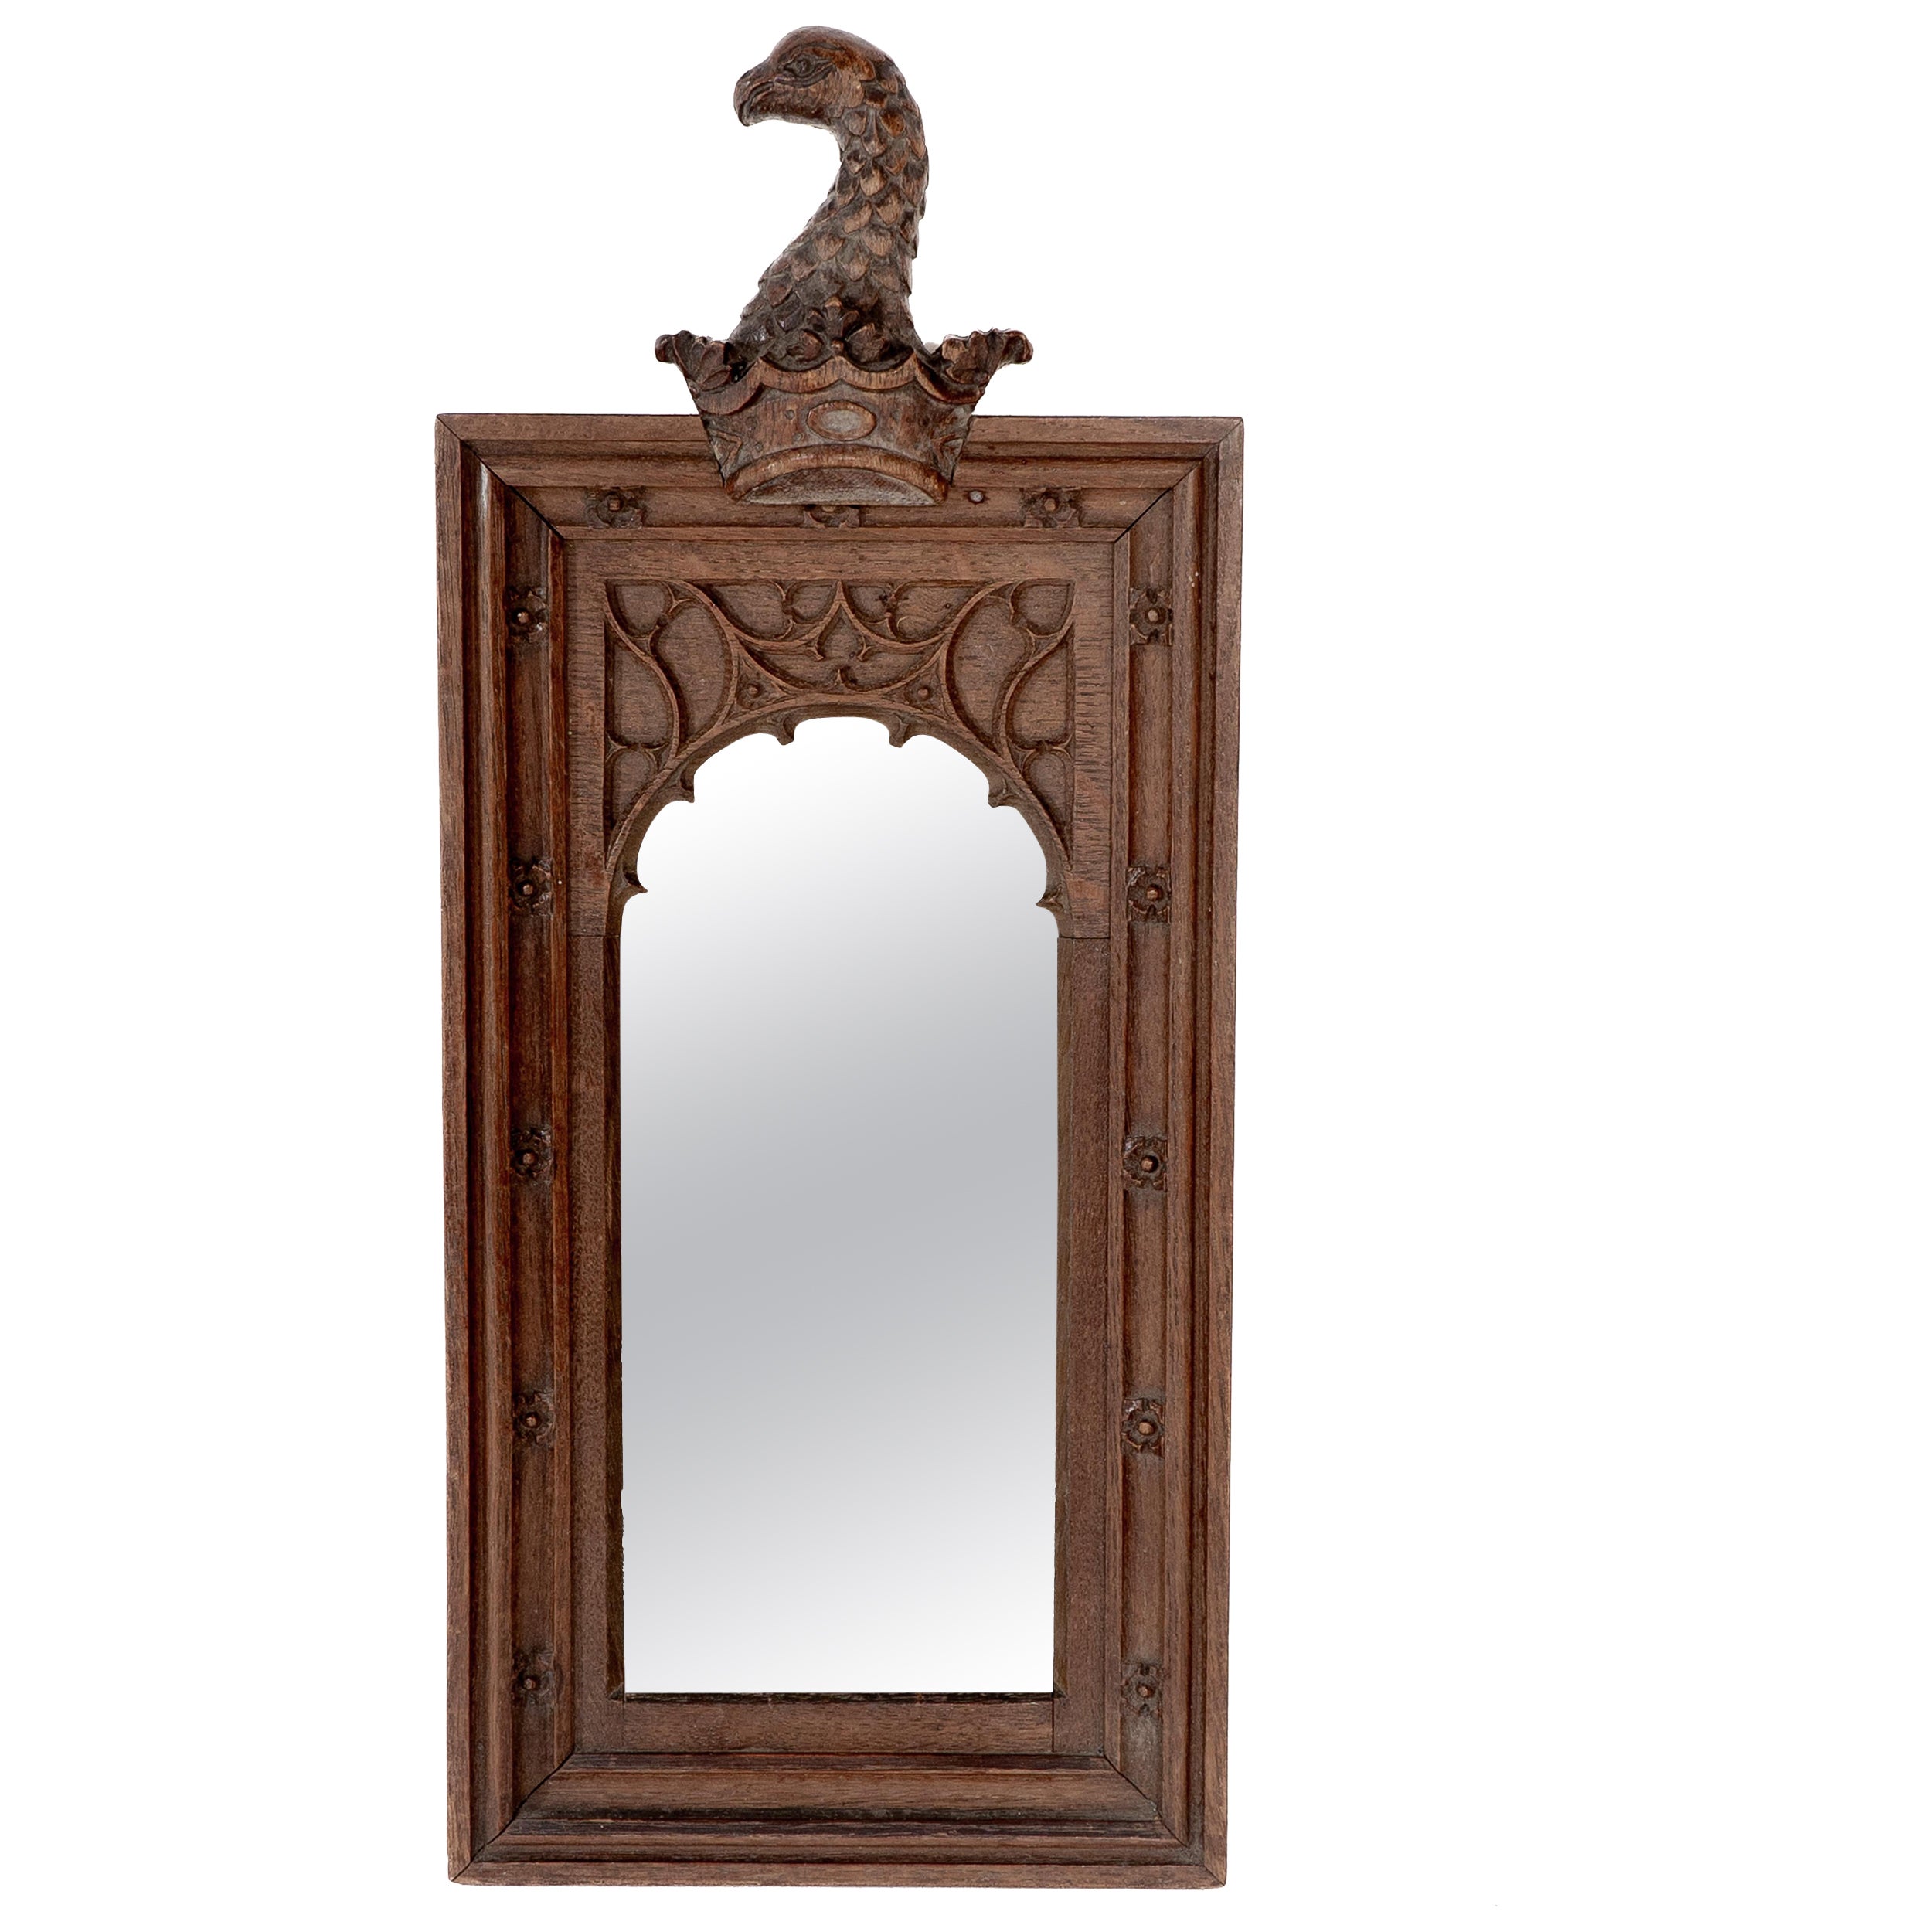 A Gothic Revival oak mirror surmounted with a carved eagle to the top For Sale